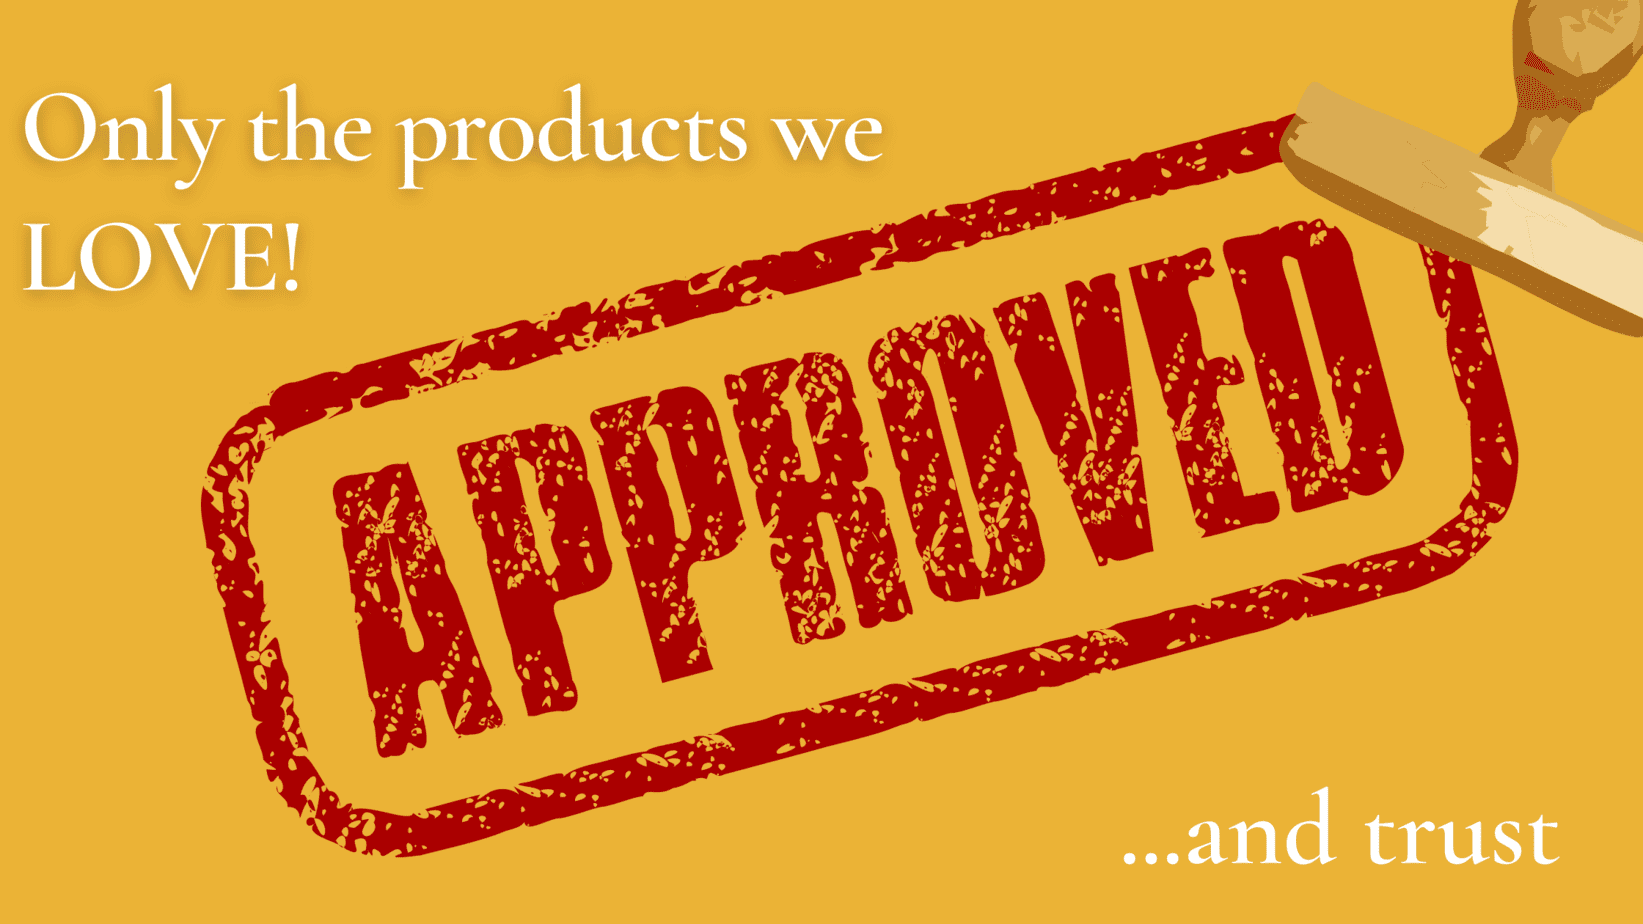 Product Approval Sign- Nutrients